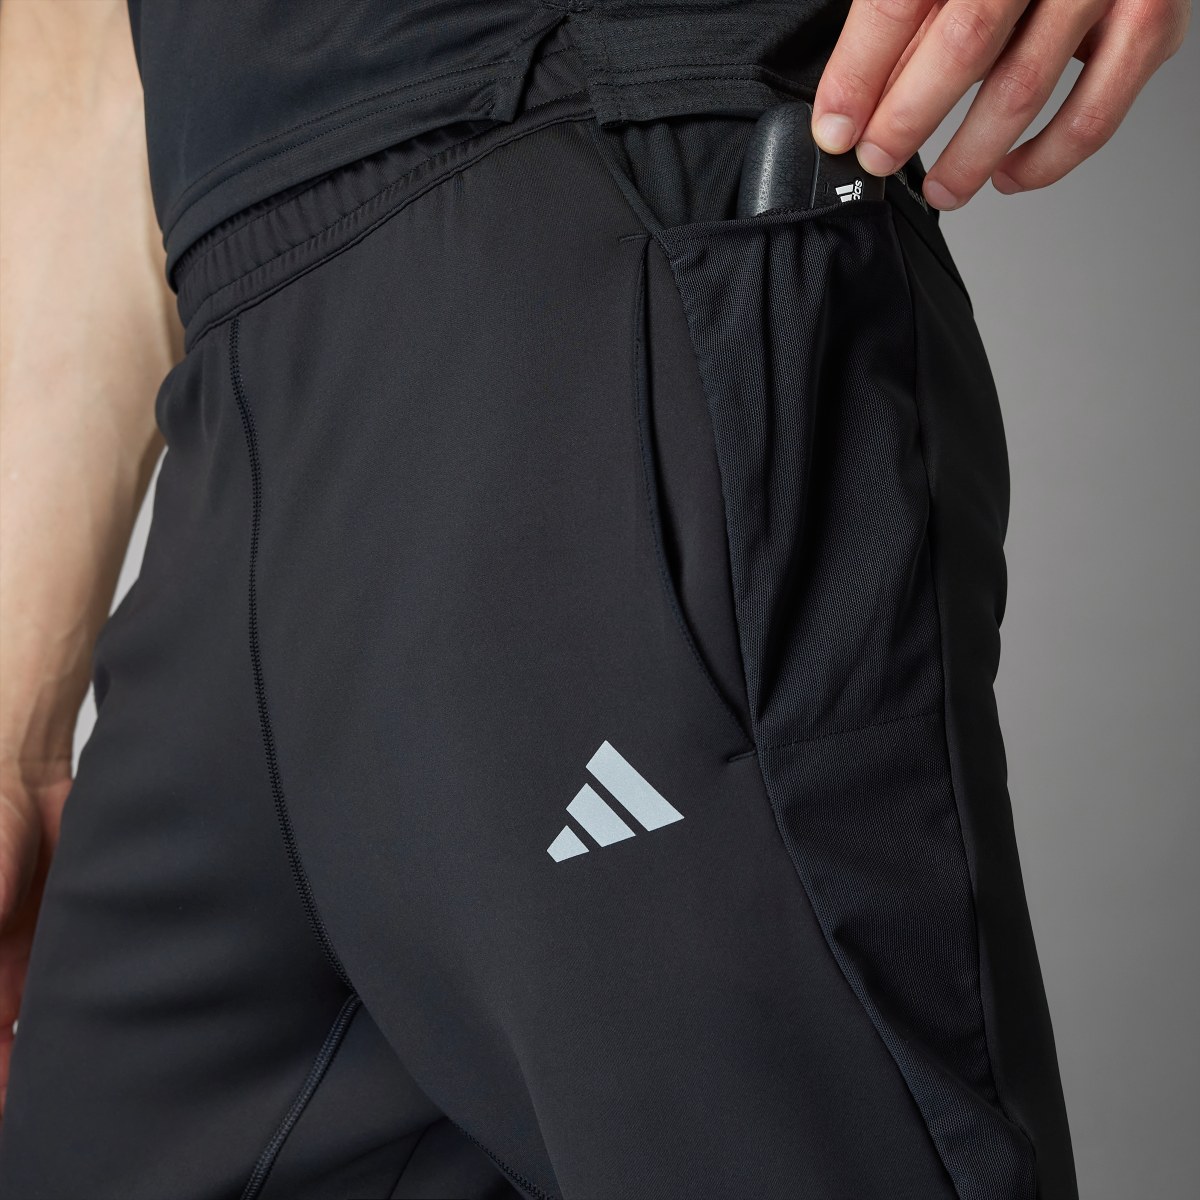 Adidas Own the Run Astro Knit Pants. 7